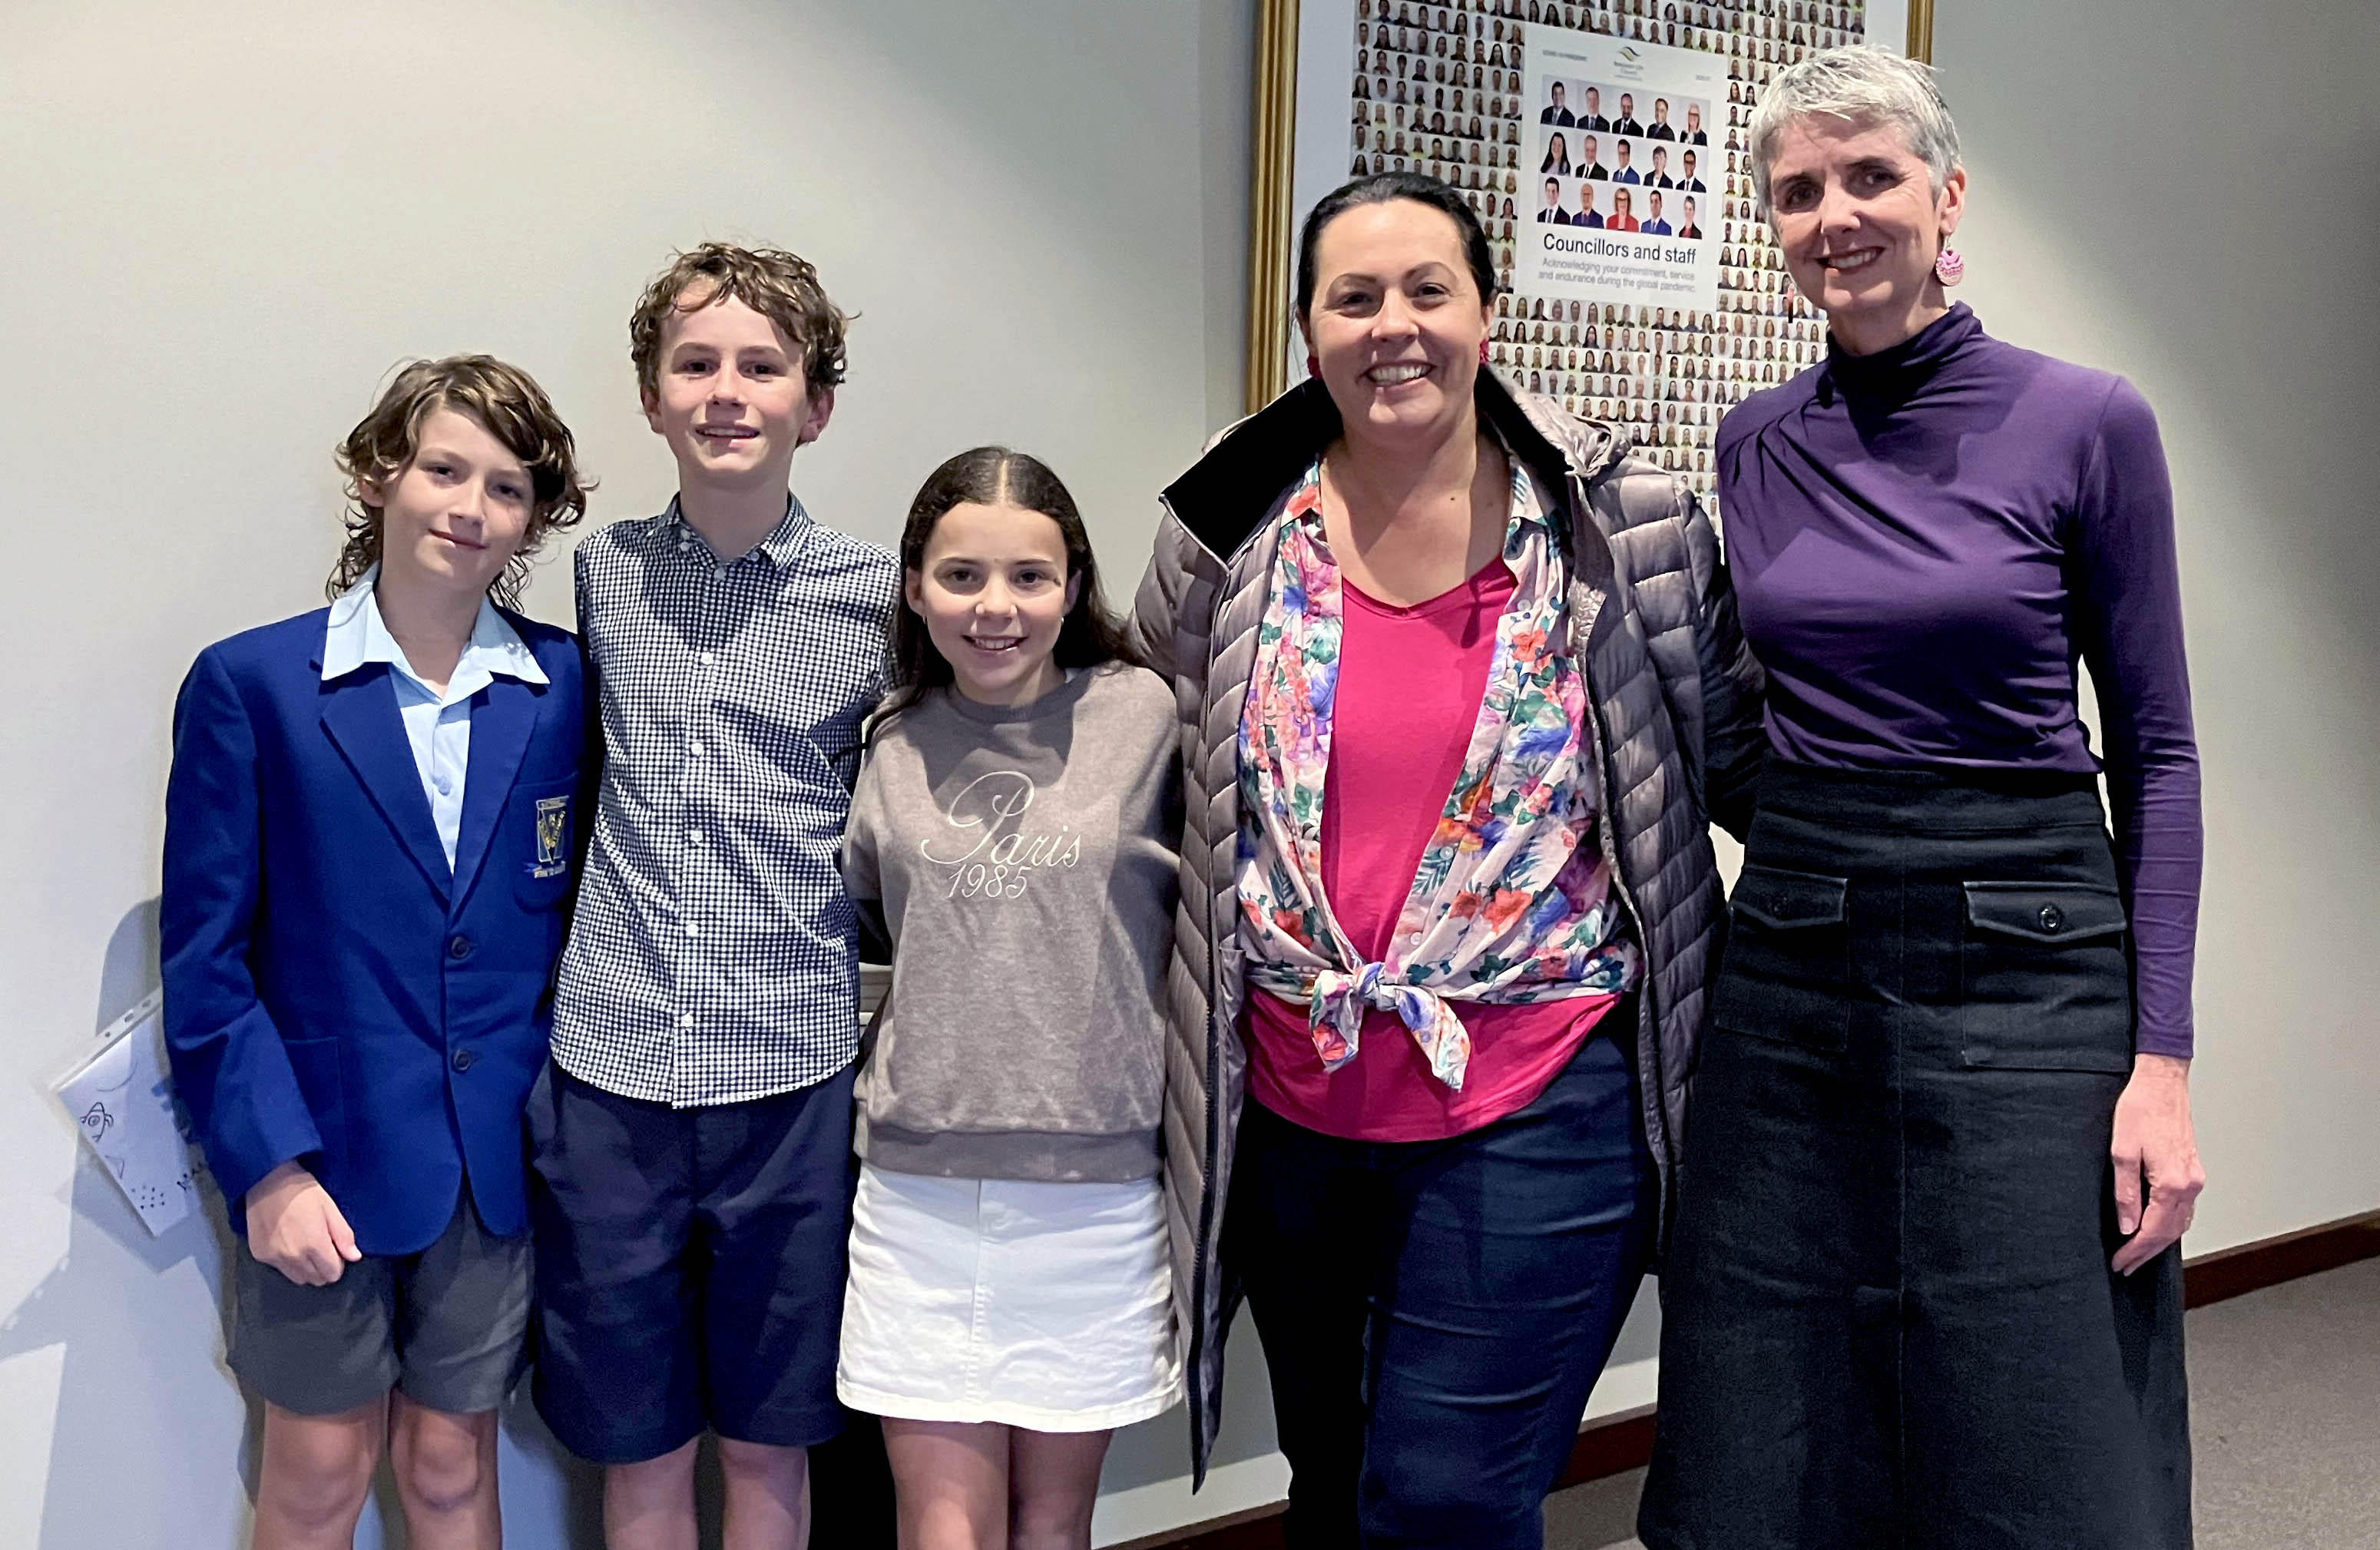 Mayor Philipa Veitch pictured with three young students and a teacher